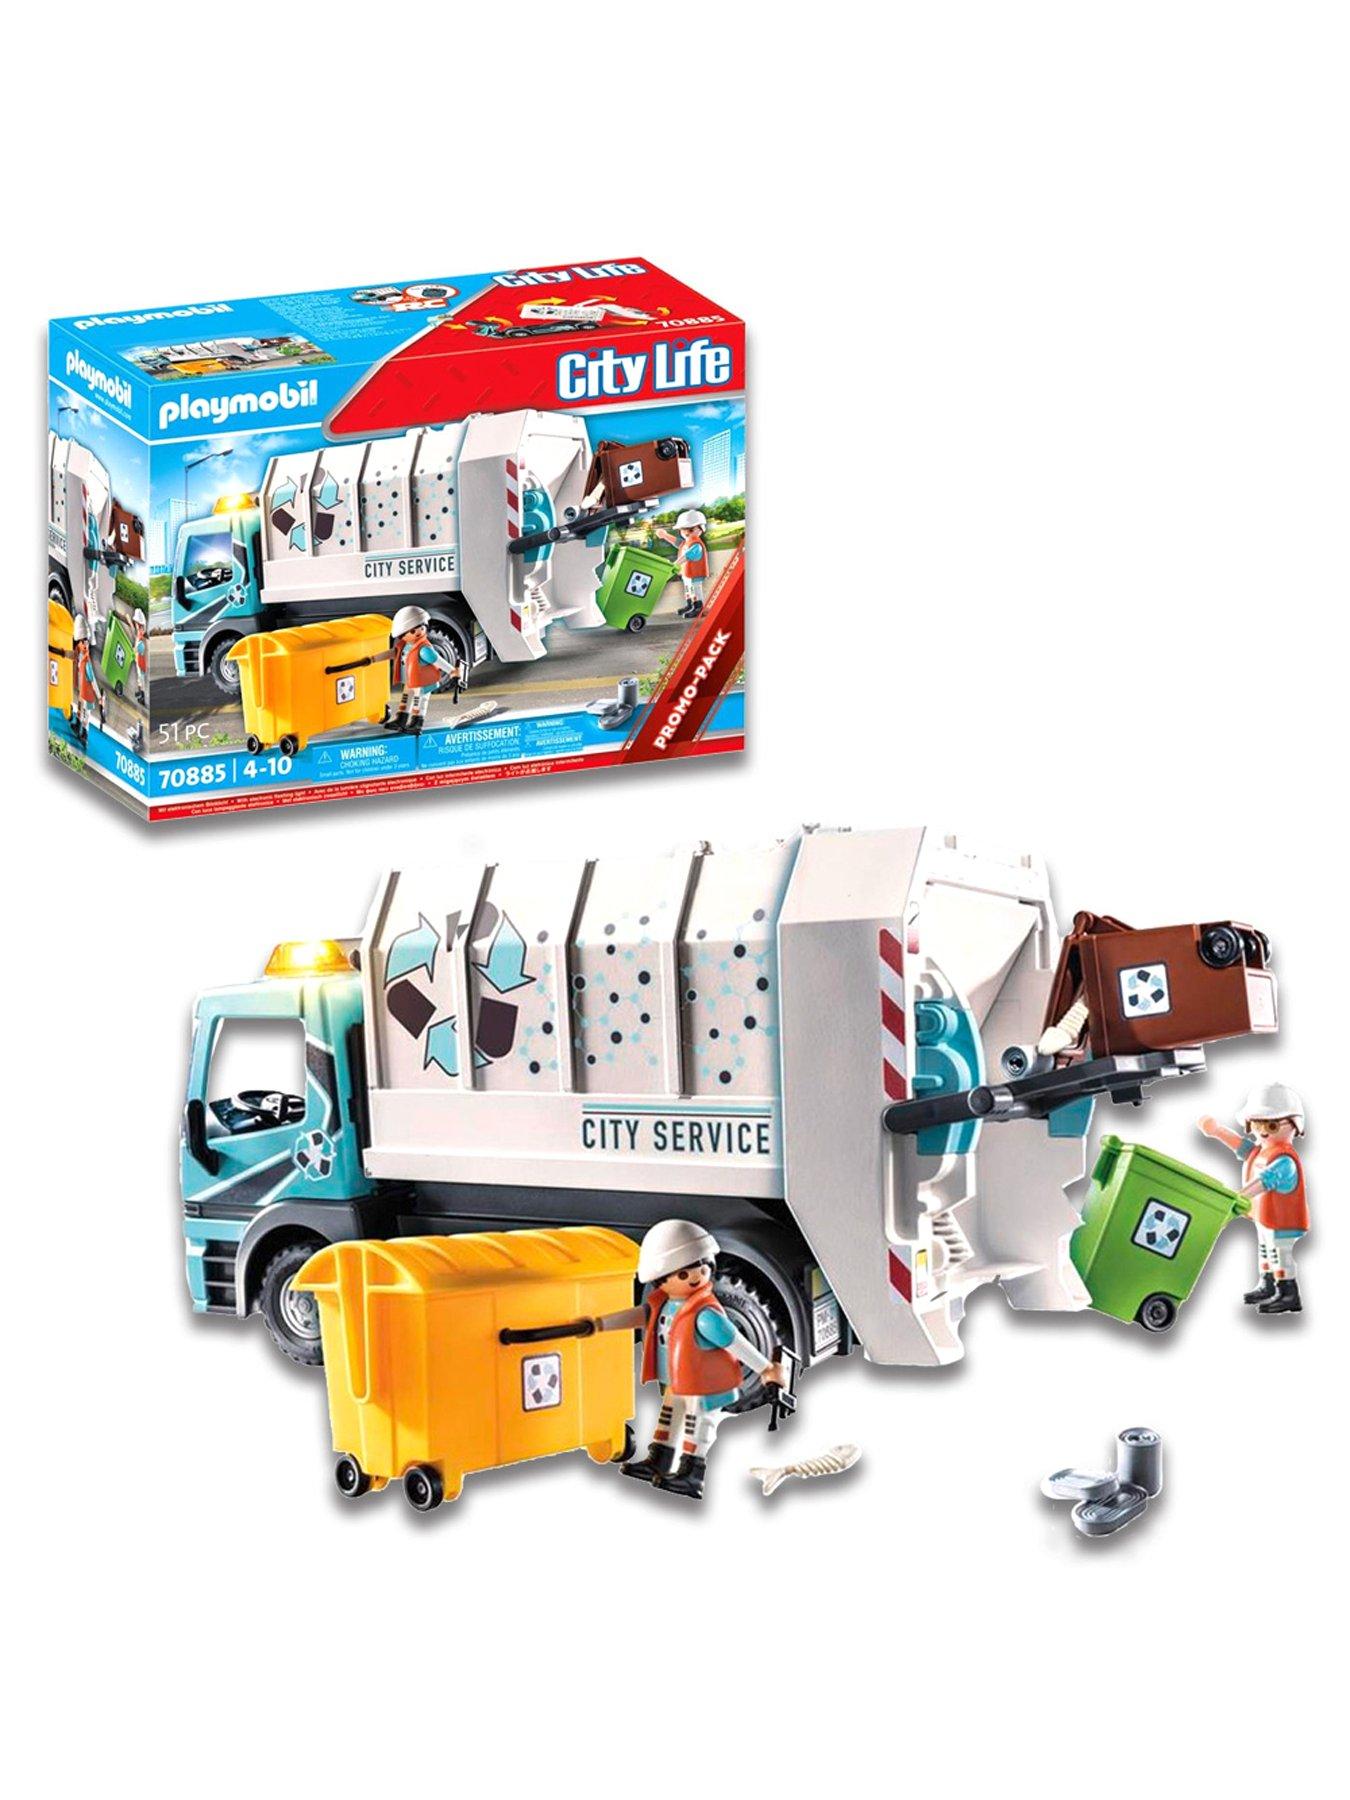 Playmobil City Action - Truck w. Container for recycled glass 